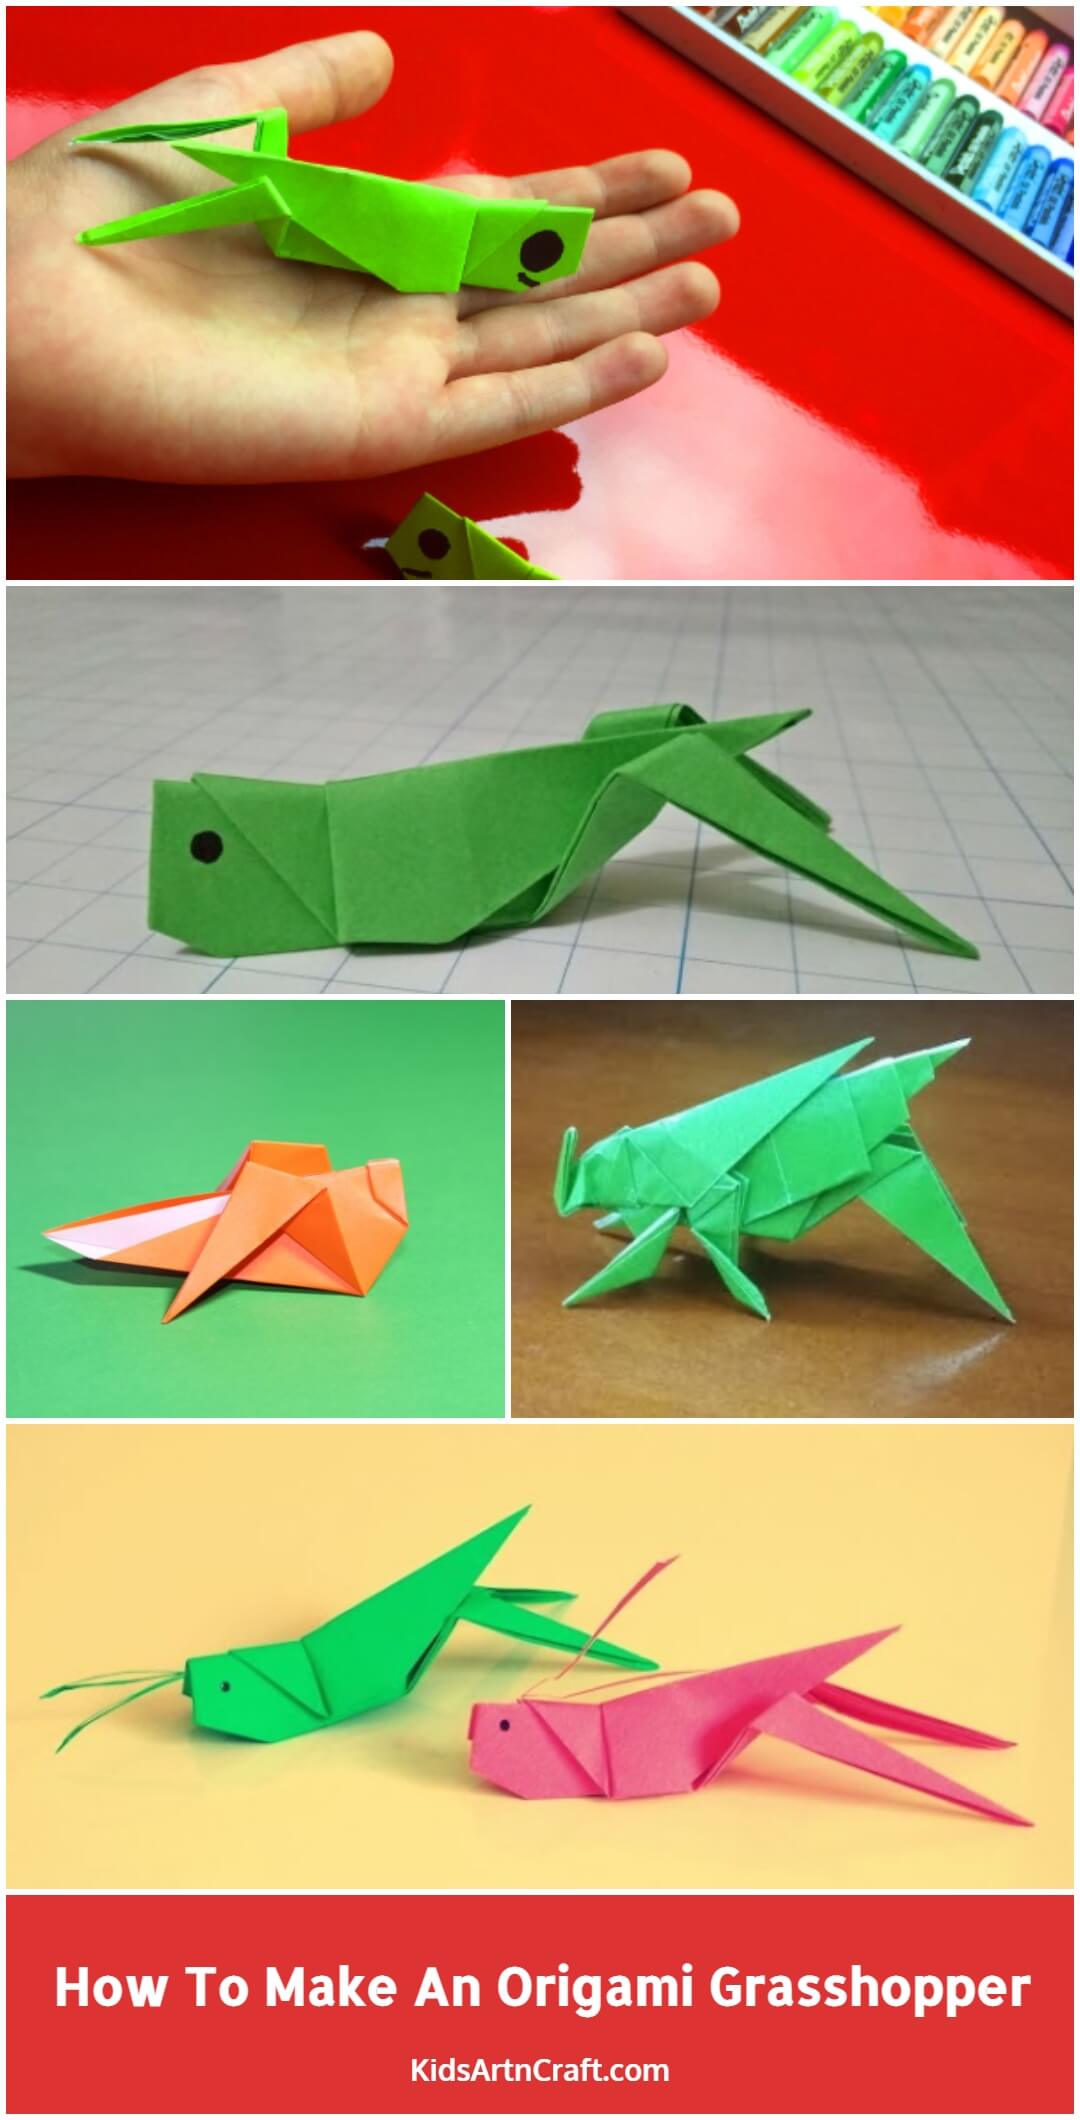 How To Make An Origami Grasshopper With Kids